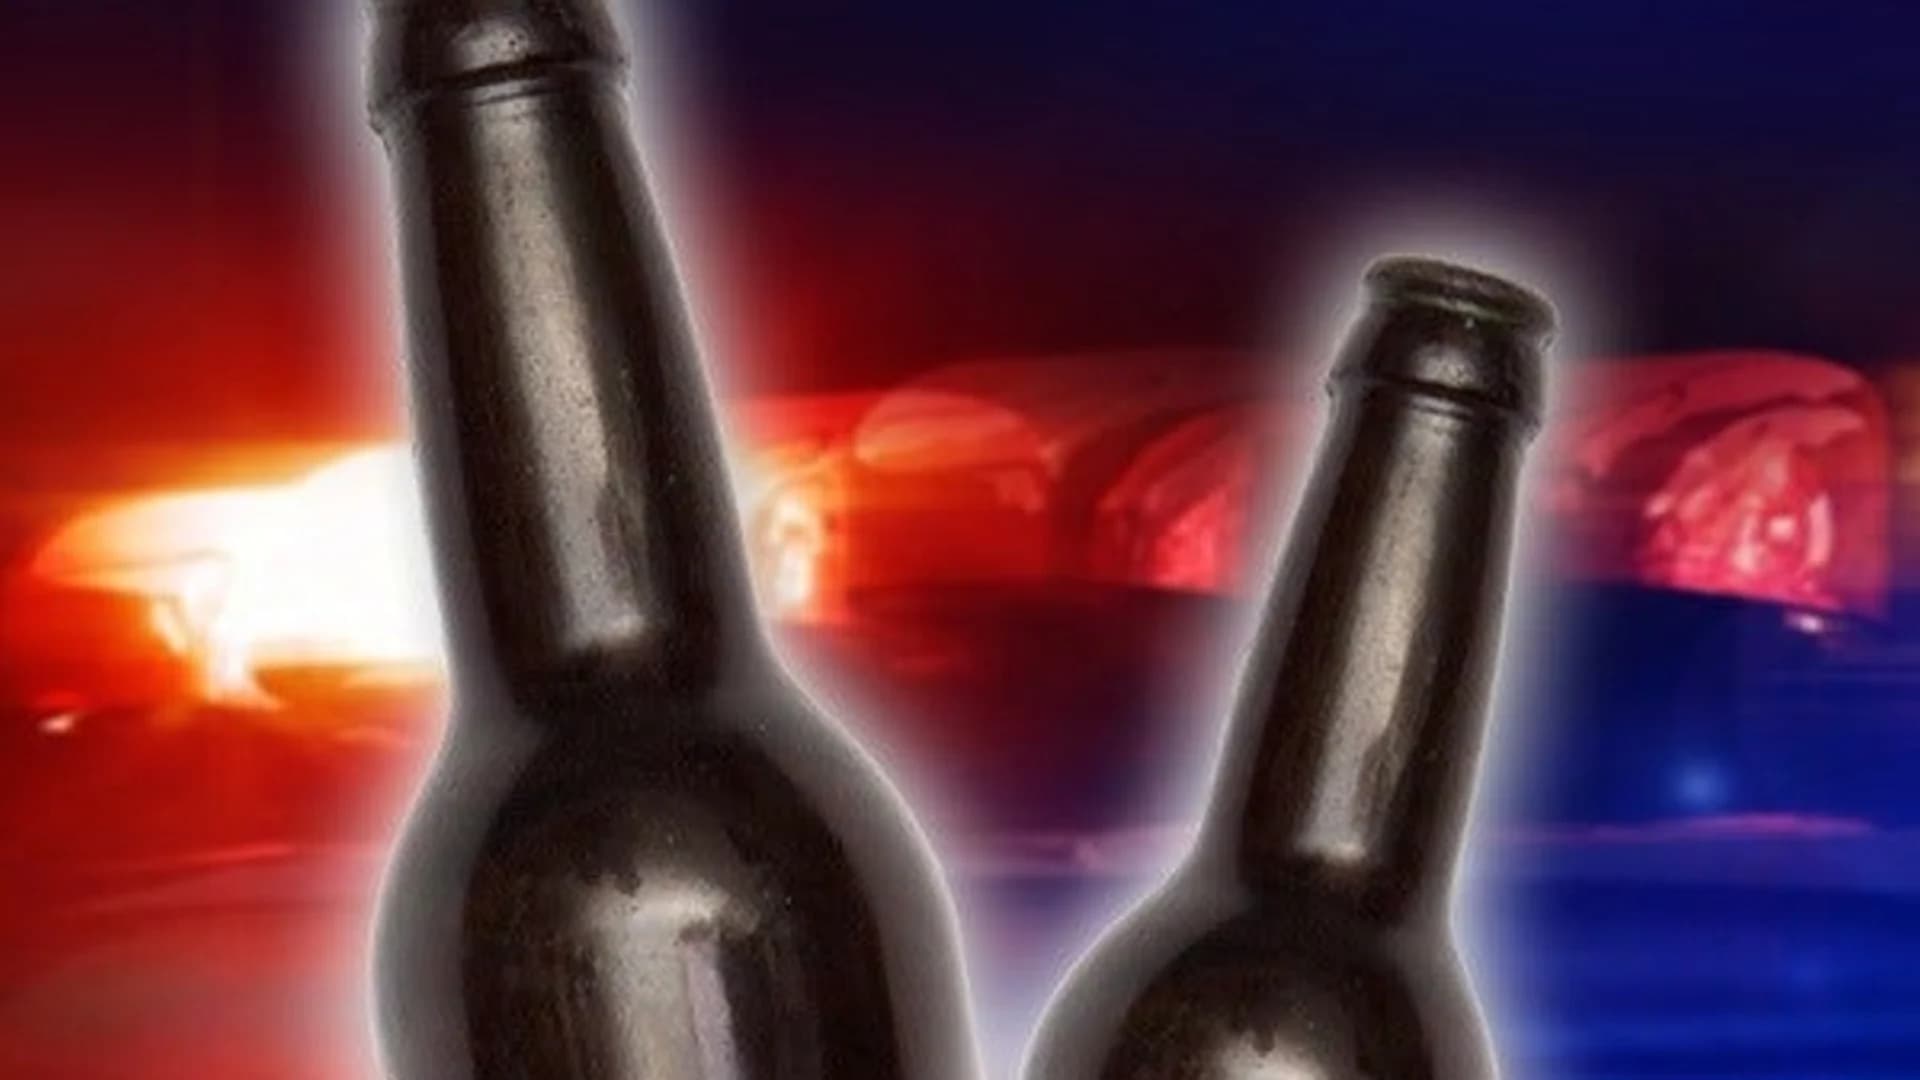 Police: Homeowner ‘unaware’ dozens of mostly underage teens drinking on property